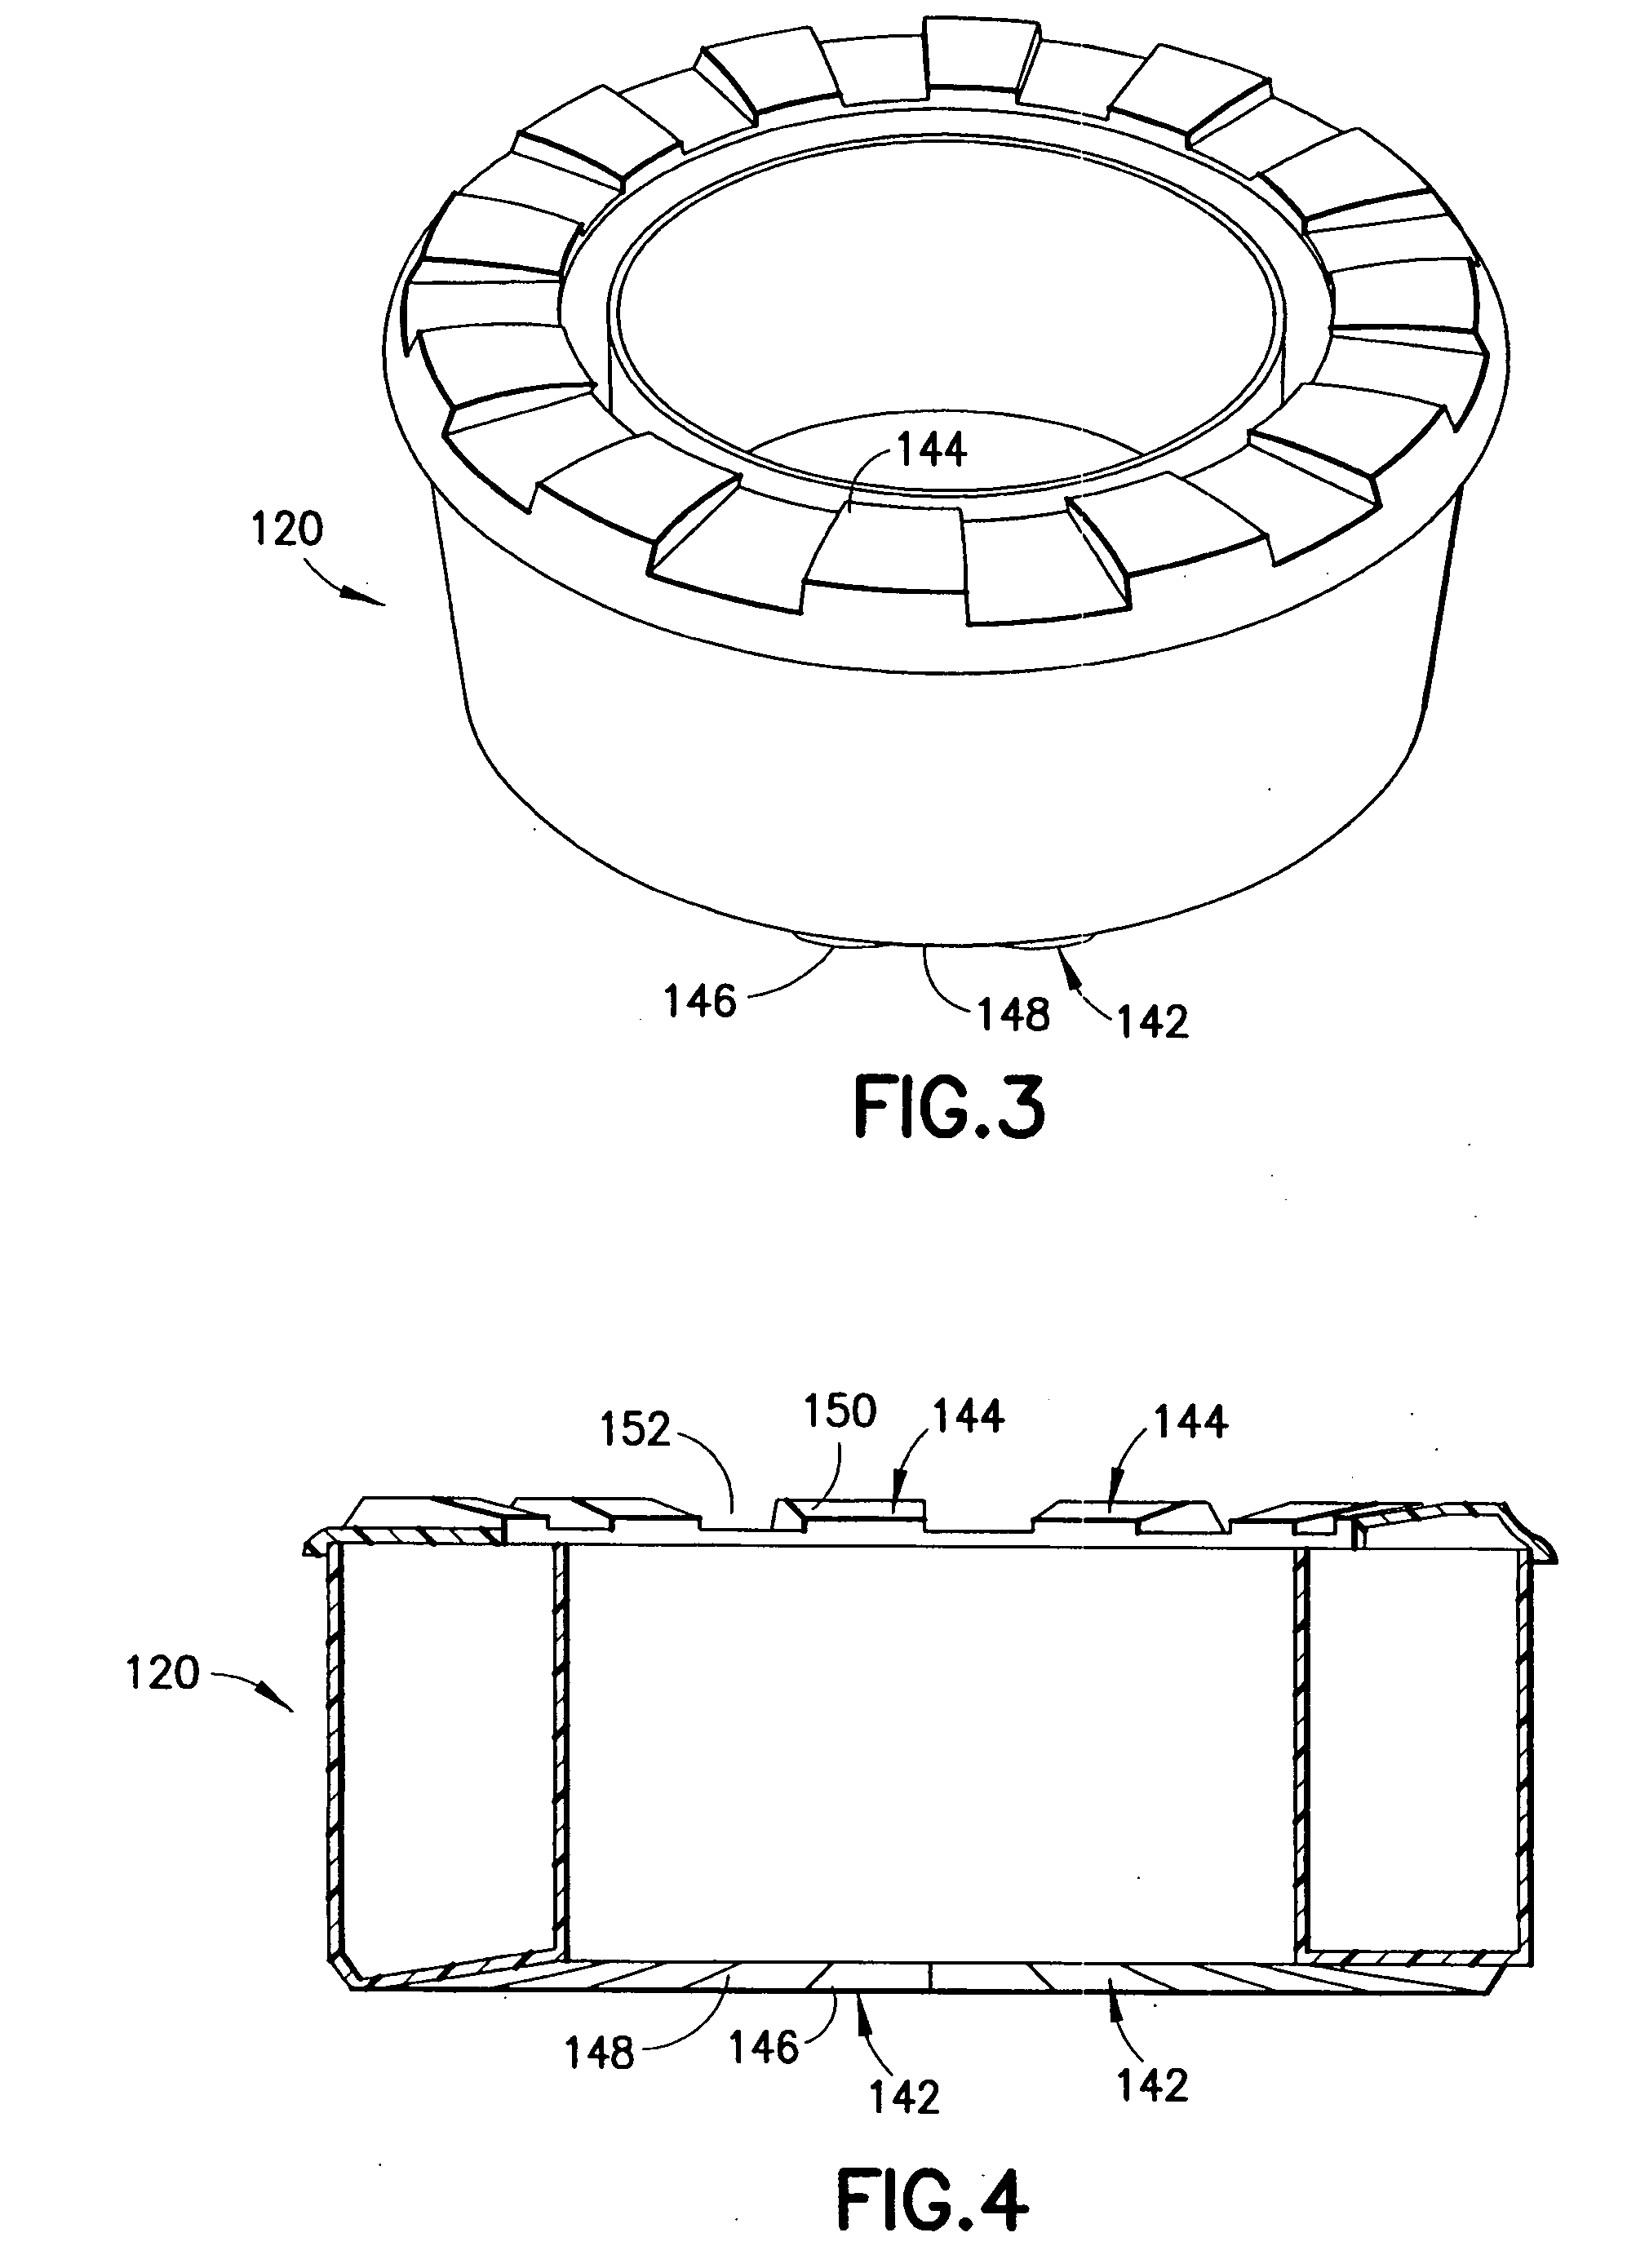 Cassette for dispensing flexible tubing therefrom